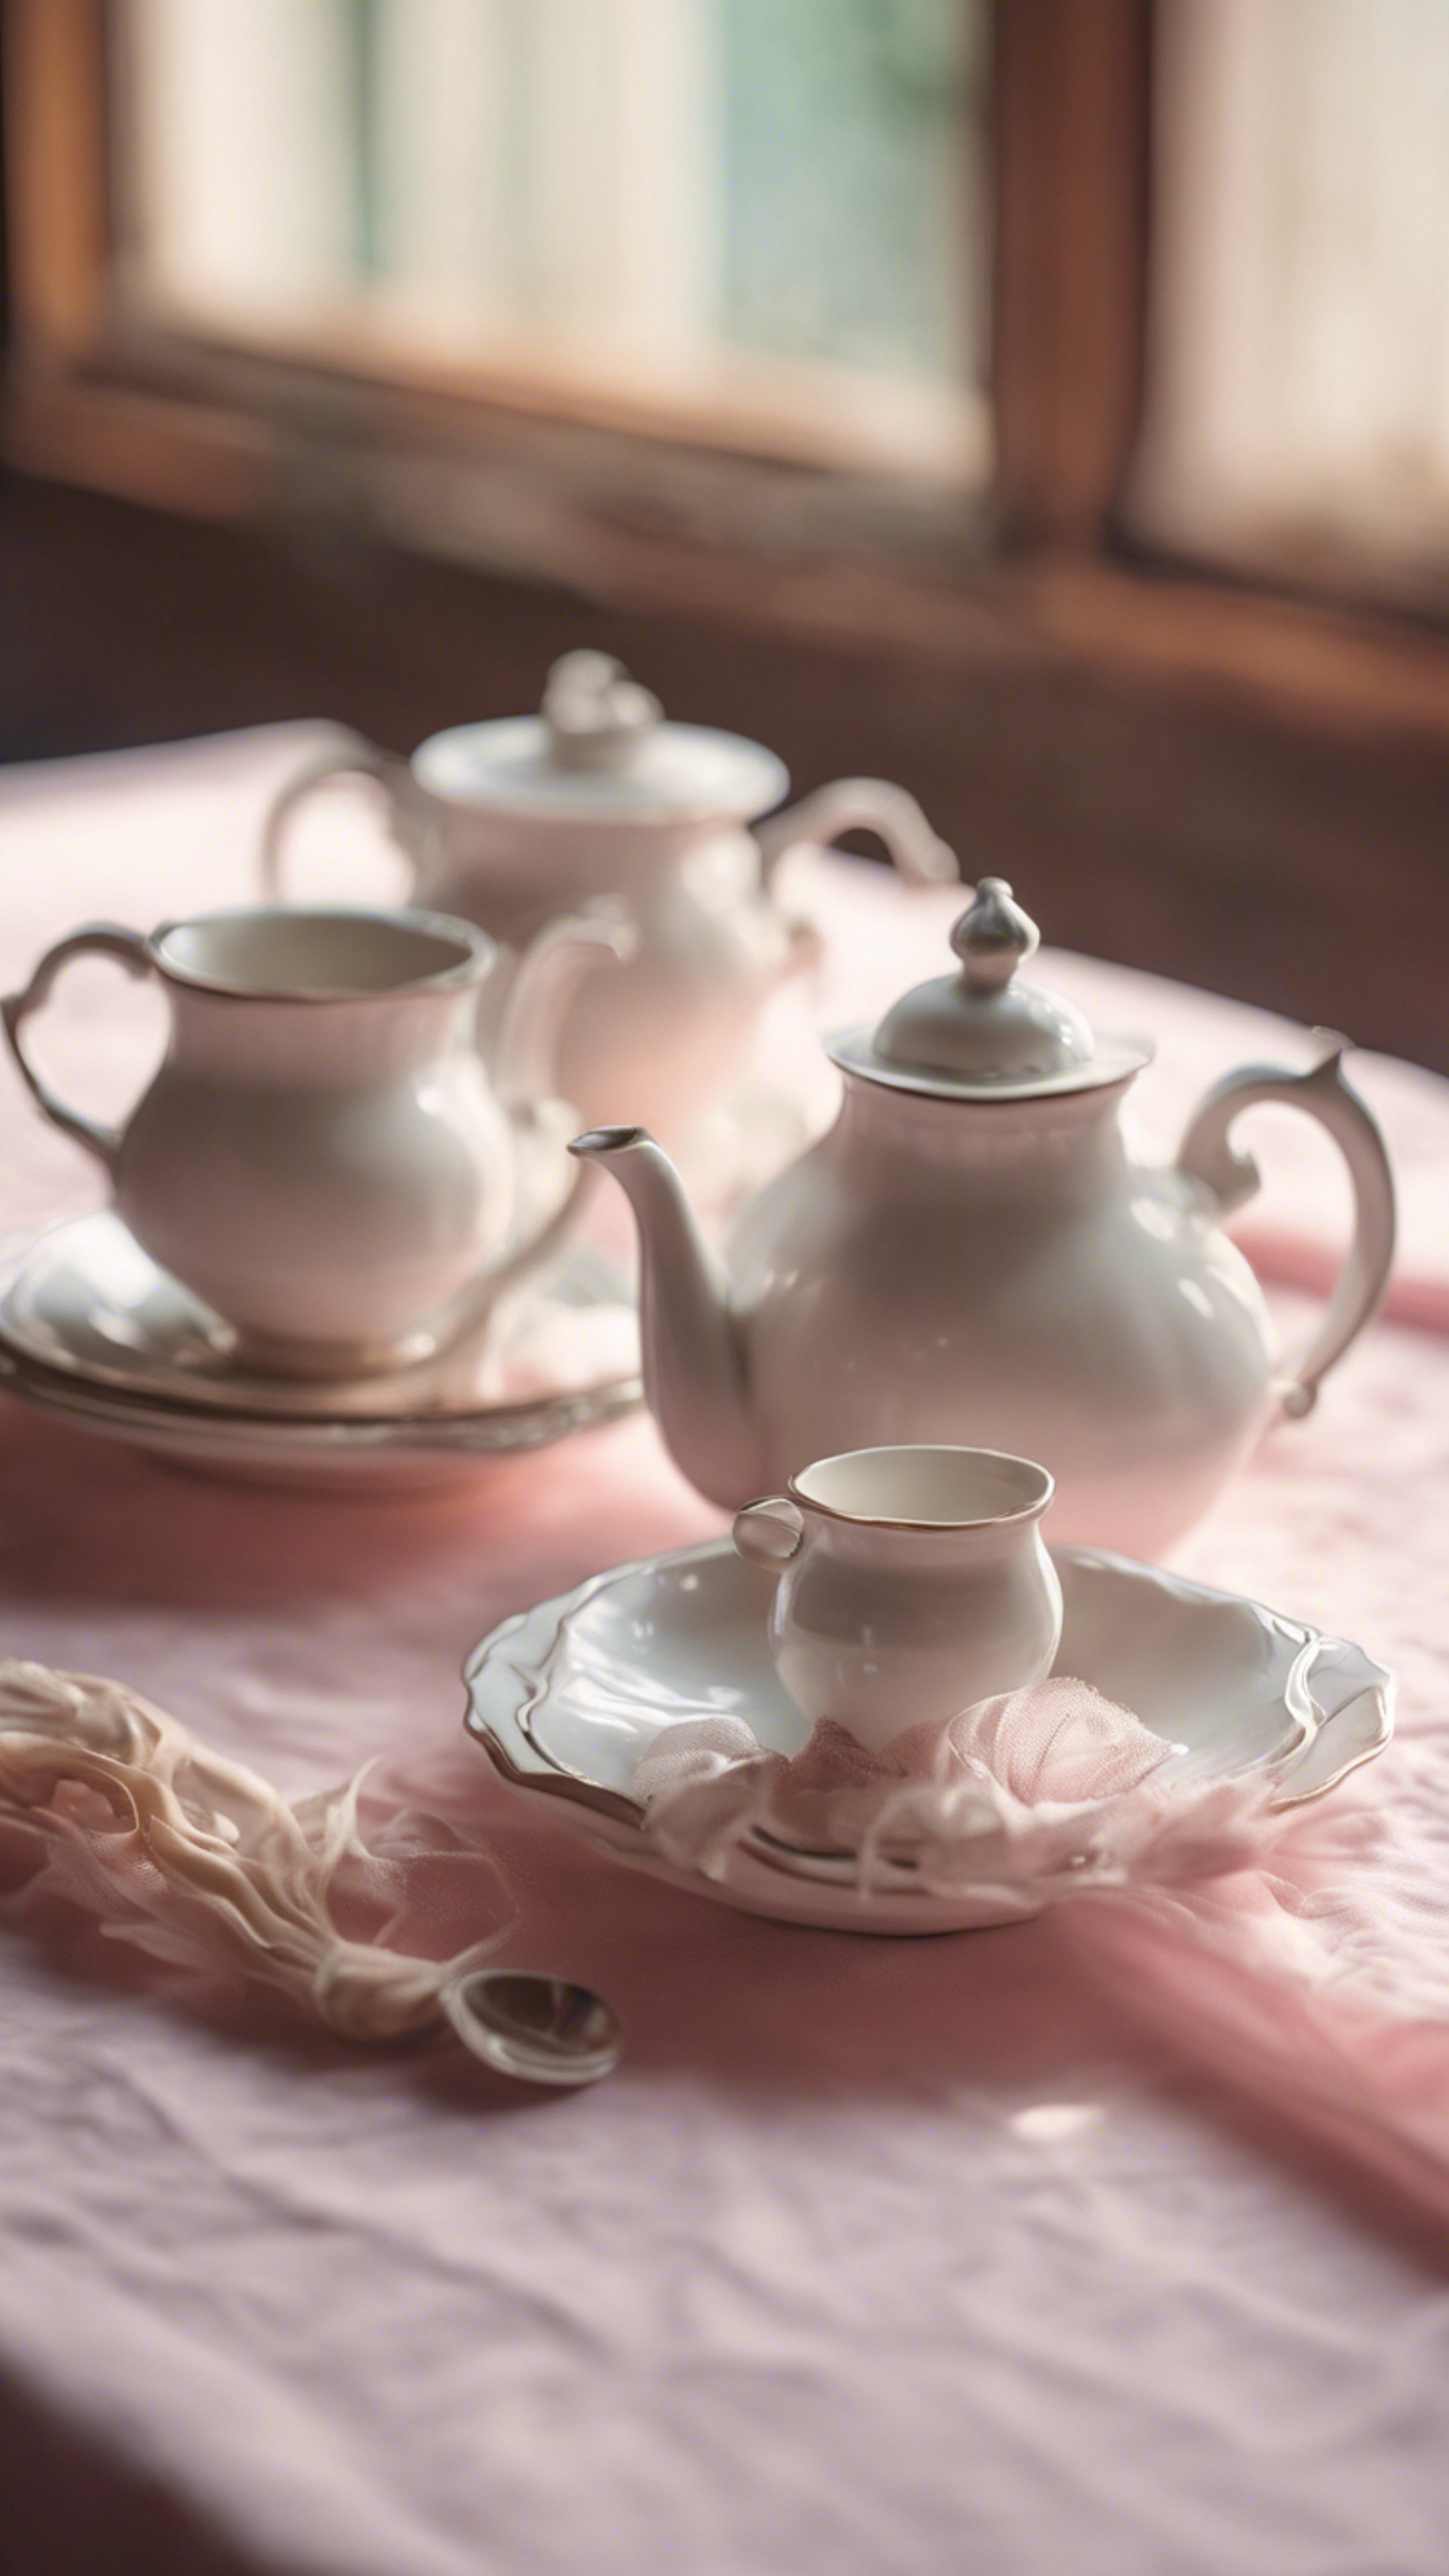 A vintage white tea set, arranged on a fluffy pastel pink tablecloth in a charming, old-world kitchen. Tapetai[519305883ddb44018966]